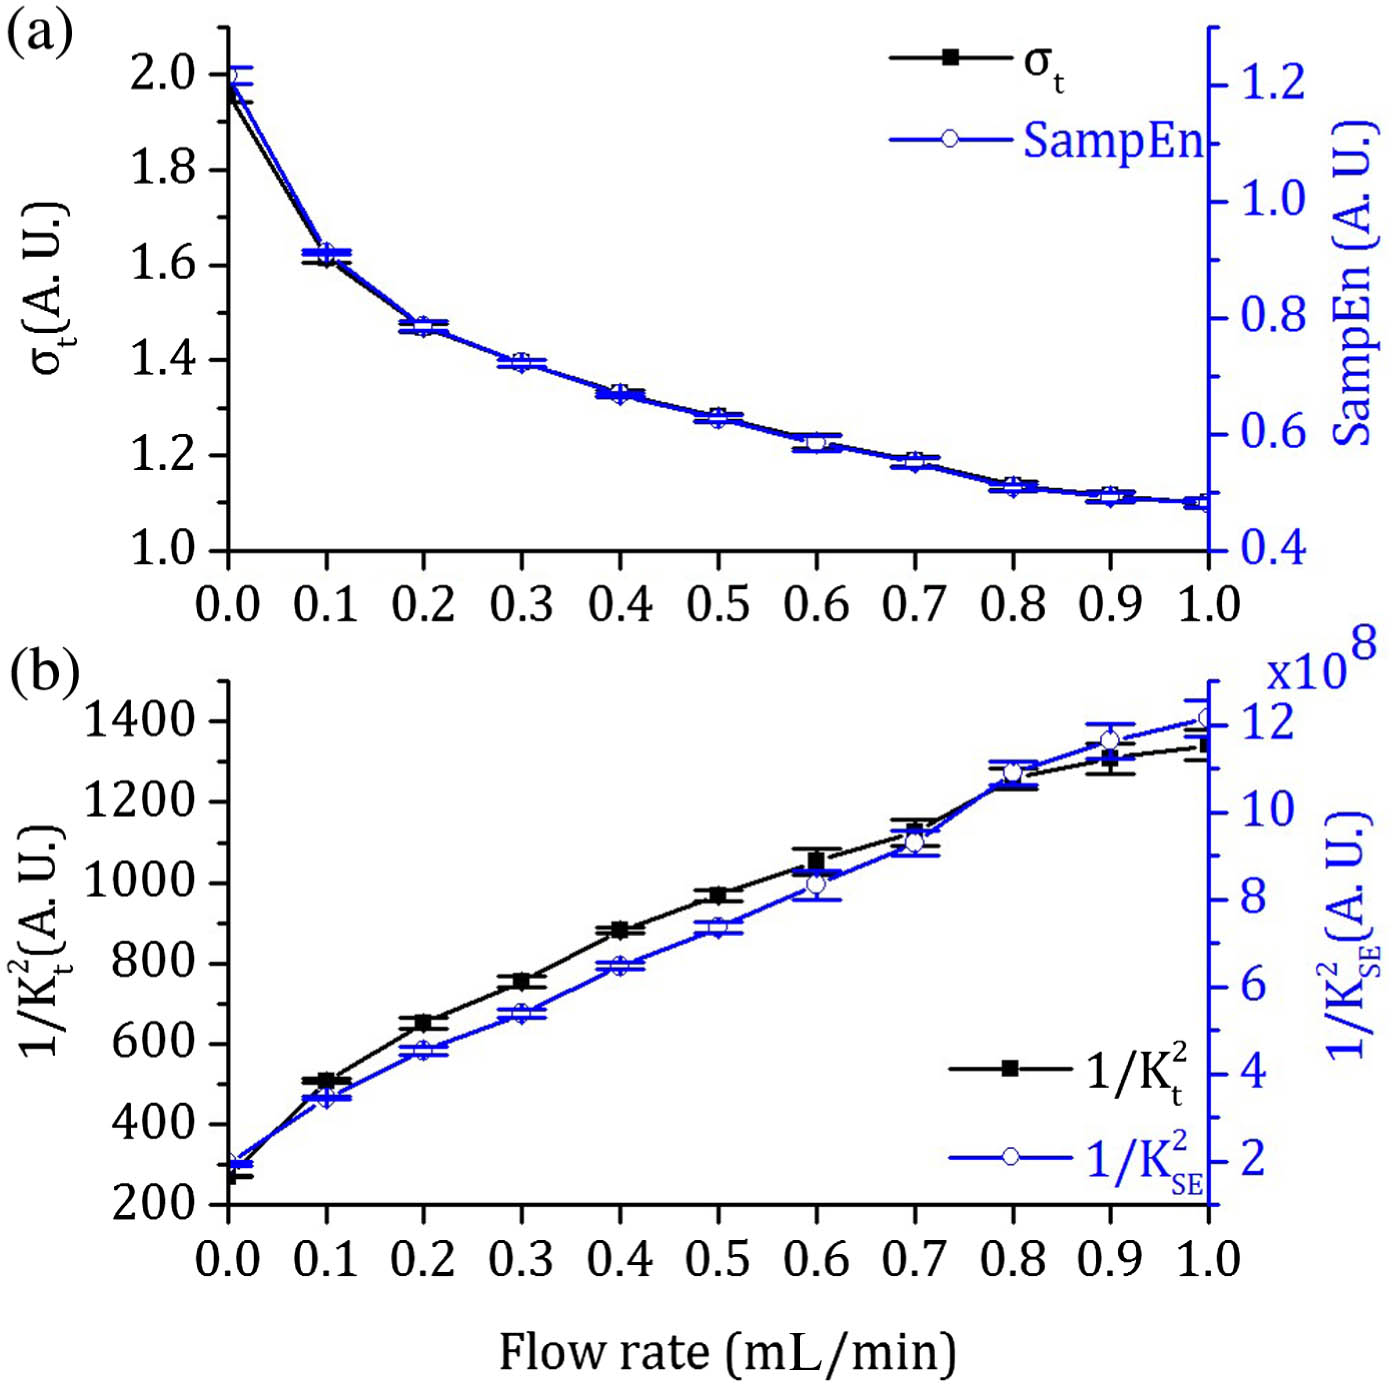 Comparison of speckle contrast and SampEn calculations from phantom flow experiments. (a) Both σt and SampEn show a similar exponential decrease with increasing flow rate. (b) Incorporating the 〈I〉 in the calculation of speckle contrast (1/Kt2) and SampEn contrast (1/KSE2) results in a linear relationship with the rate of flow, as well as a greater range of values for SampEn contrast. (Each point is an average of 60 values taken over 1 min at a constant flow rate. Error bars indicate the standard deviation.)